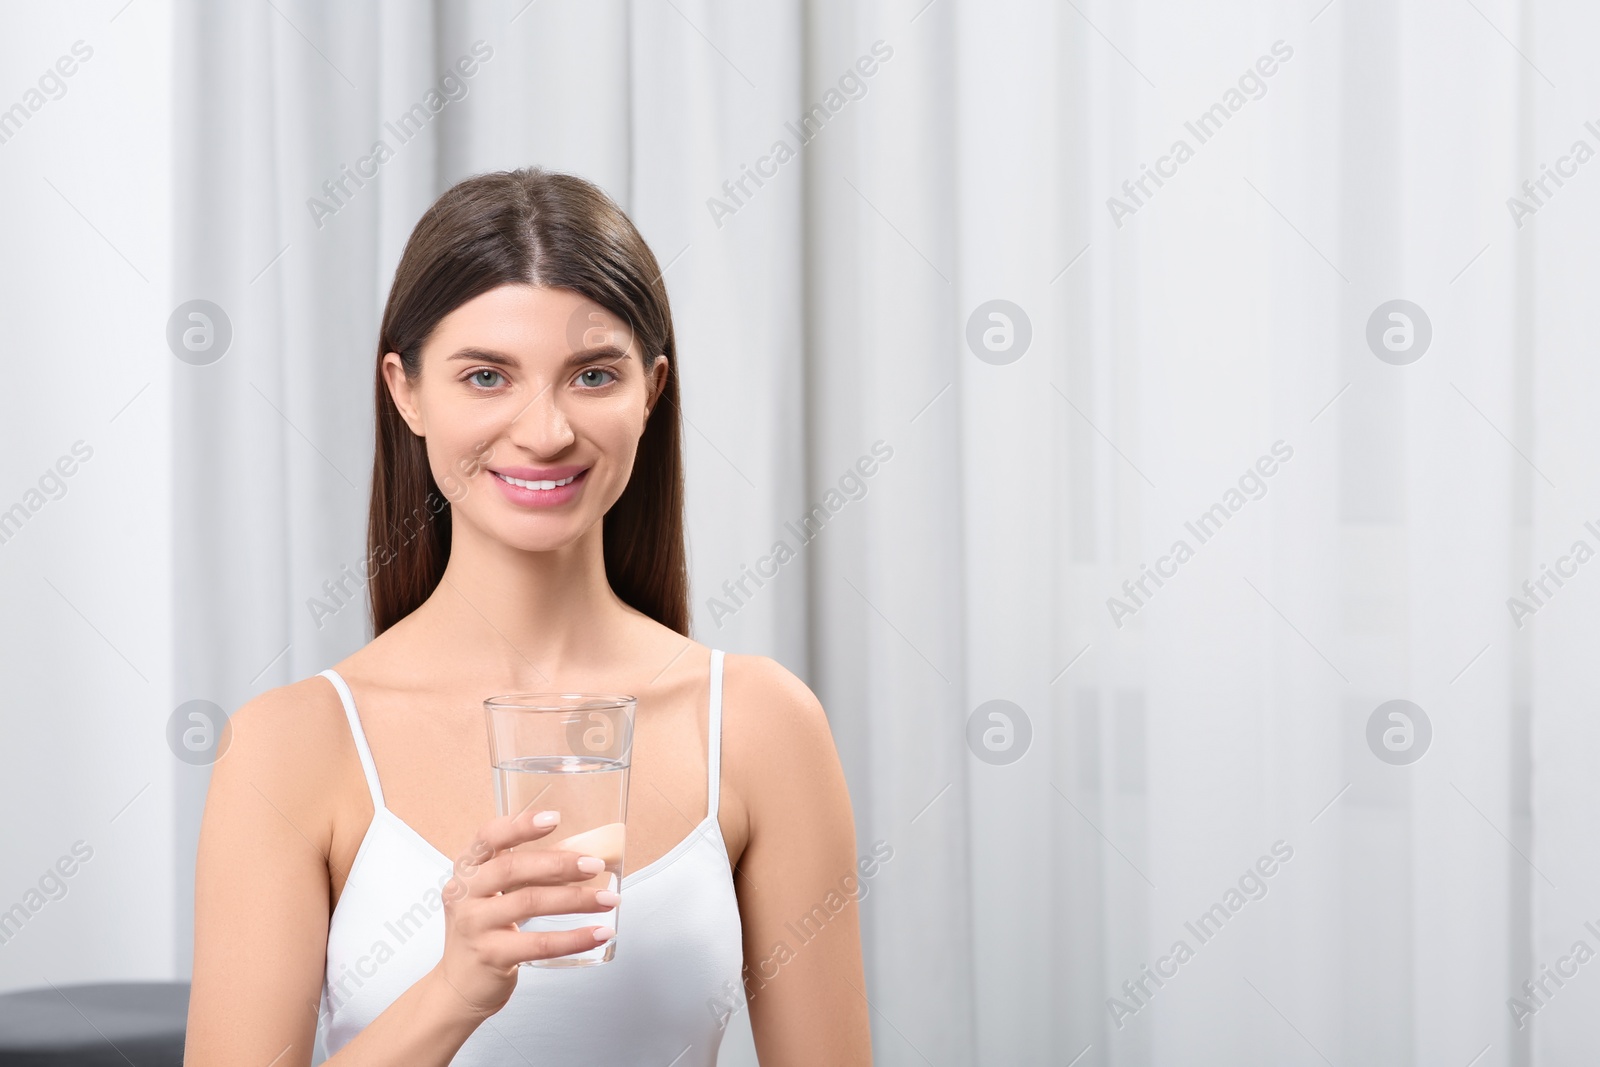 Photo of Healthy habit. Portrait of smiling woman holding glass with fresh water indoors. Space for text